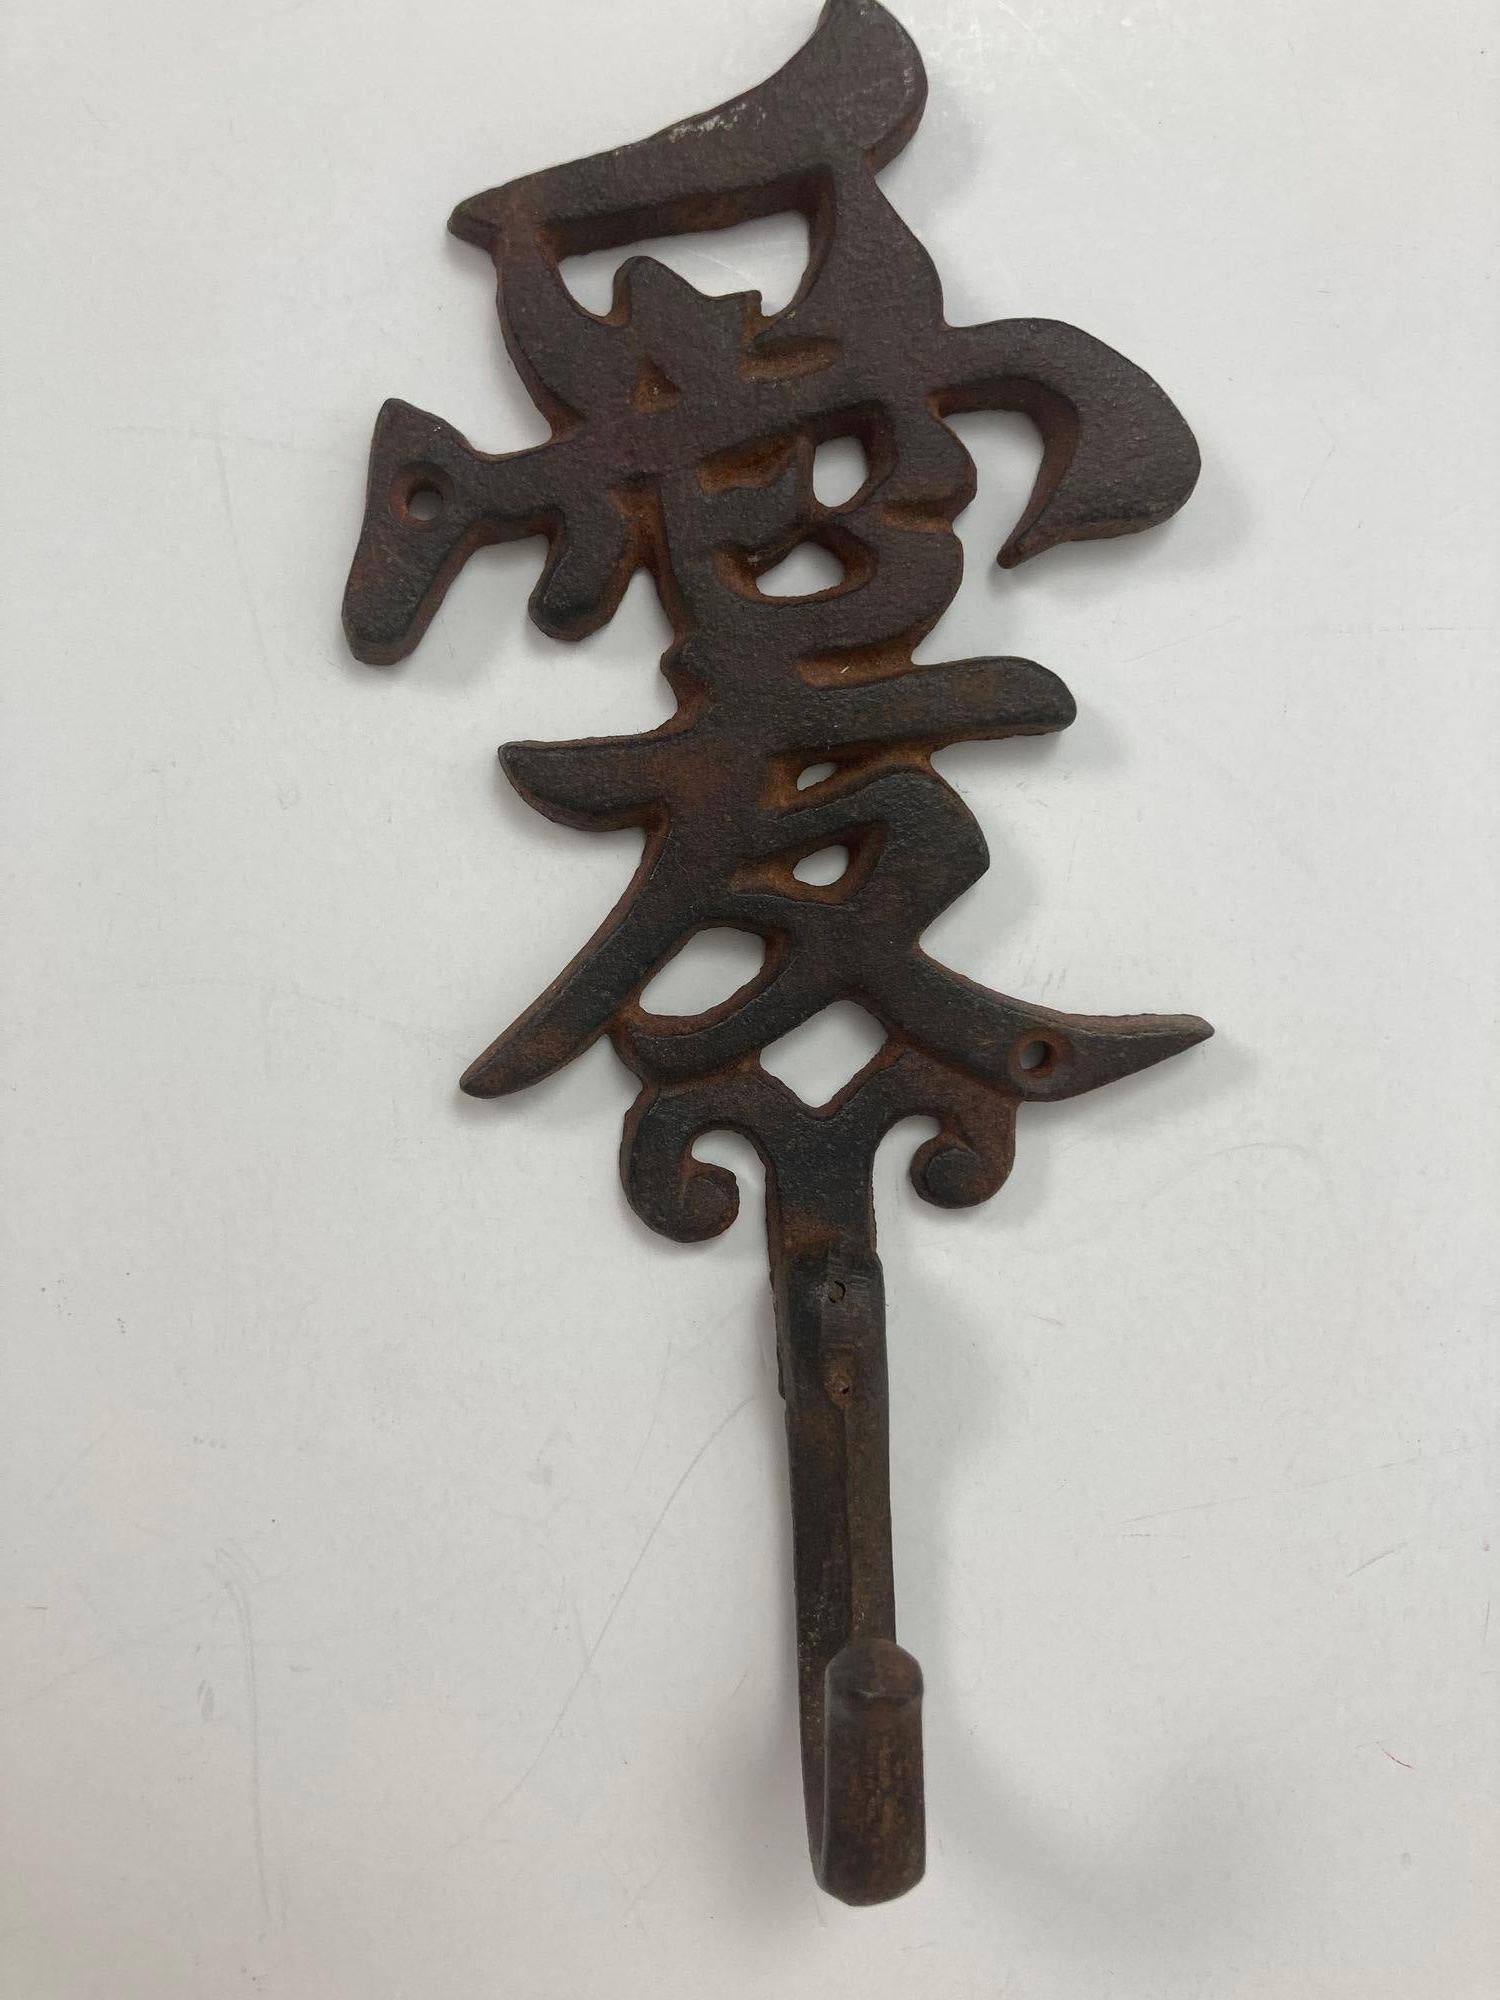 VIntage Longevity Chinese Symbol Iron Cast Wall Hook.
Asian Calligraphy Symbols Prosperity Luck.
Vintage solid iron Asian Chinese character wall blessings hook.
The characters are for prosperity, good luck, double happiness and long